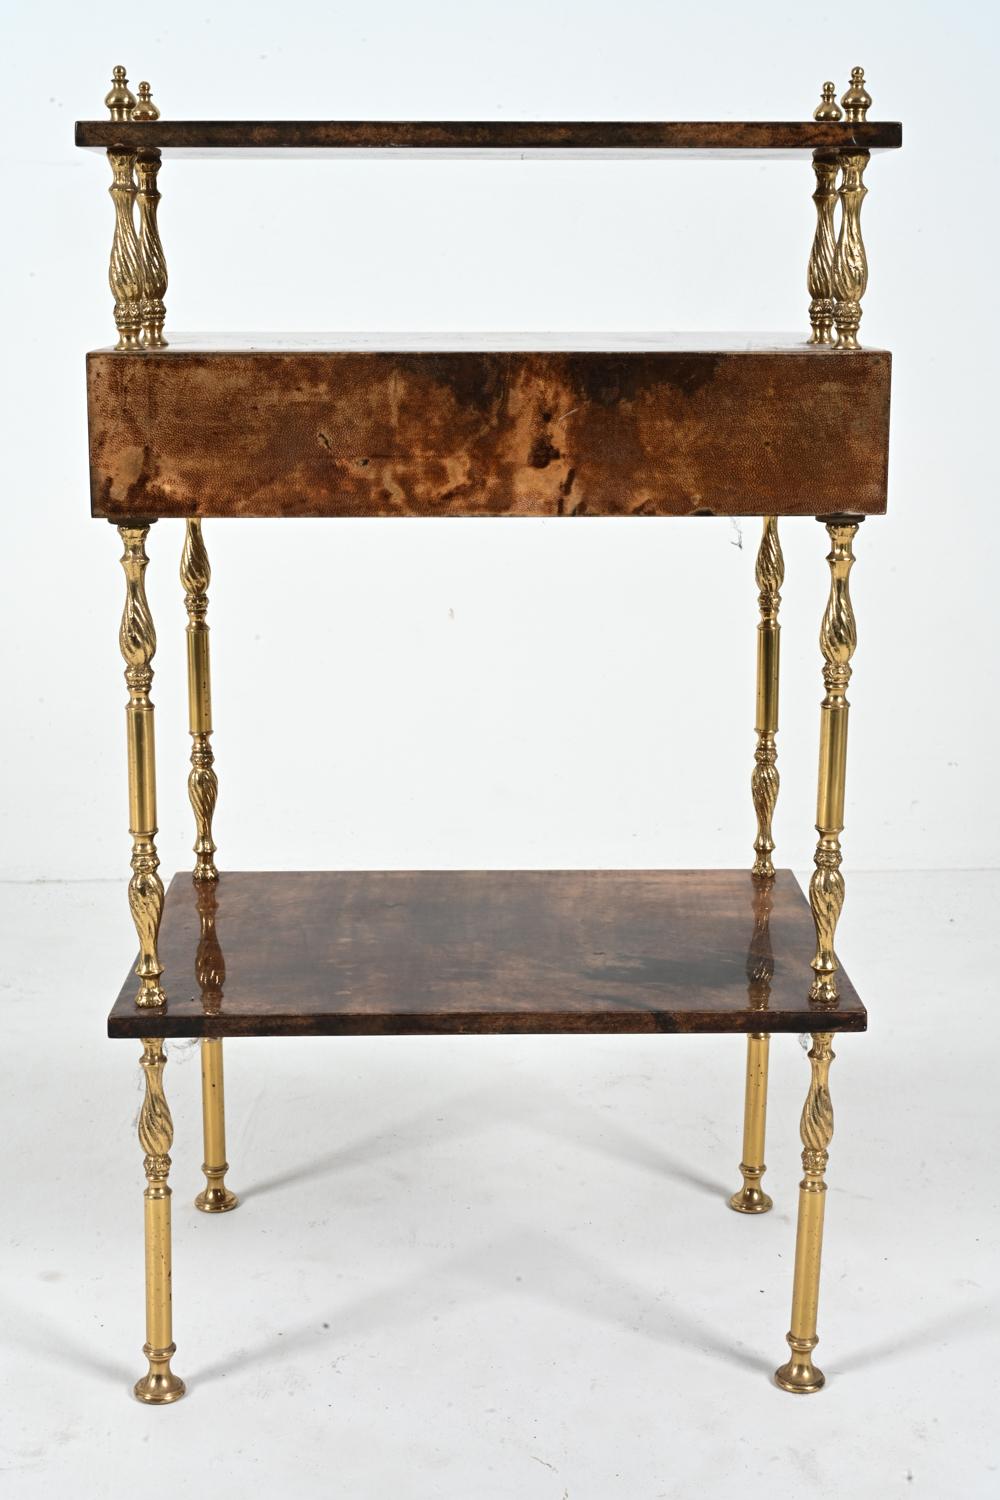 Aldo Tura Lacquered Goatskin & Brass Occasional Table, c. 1960's For Sale 9